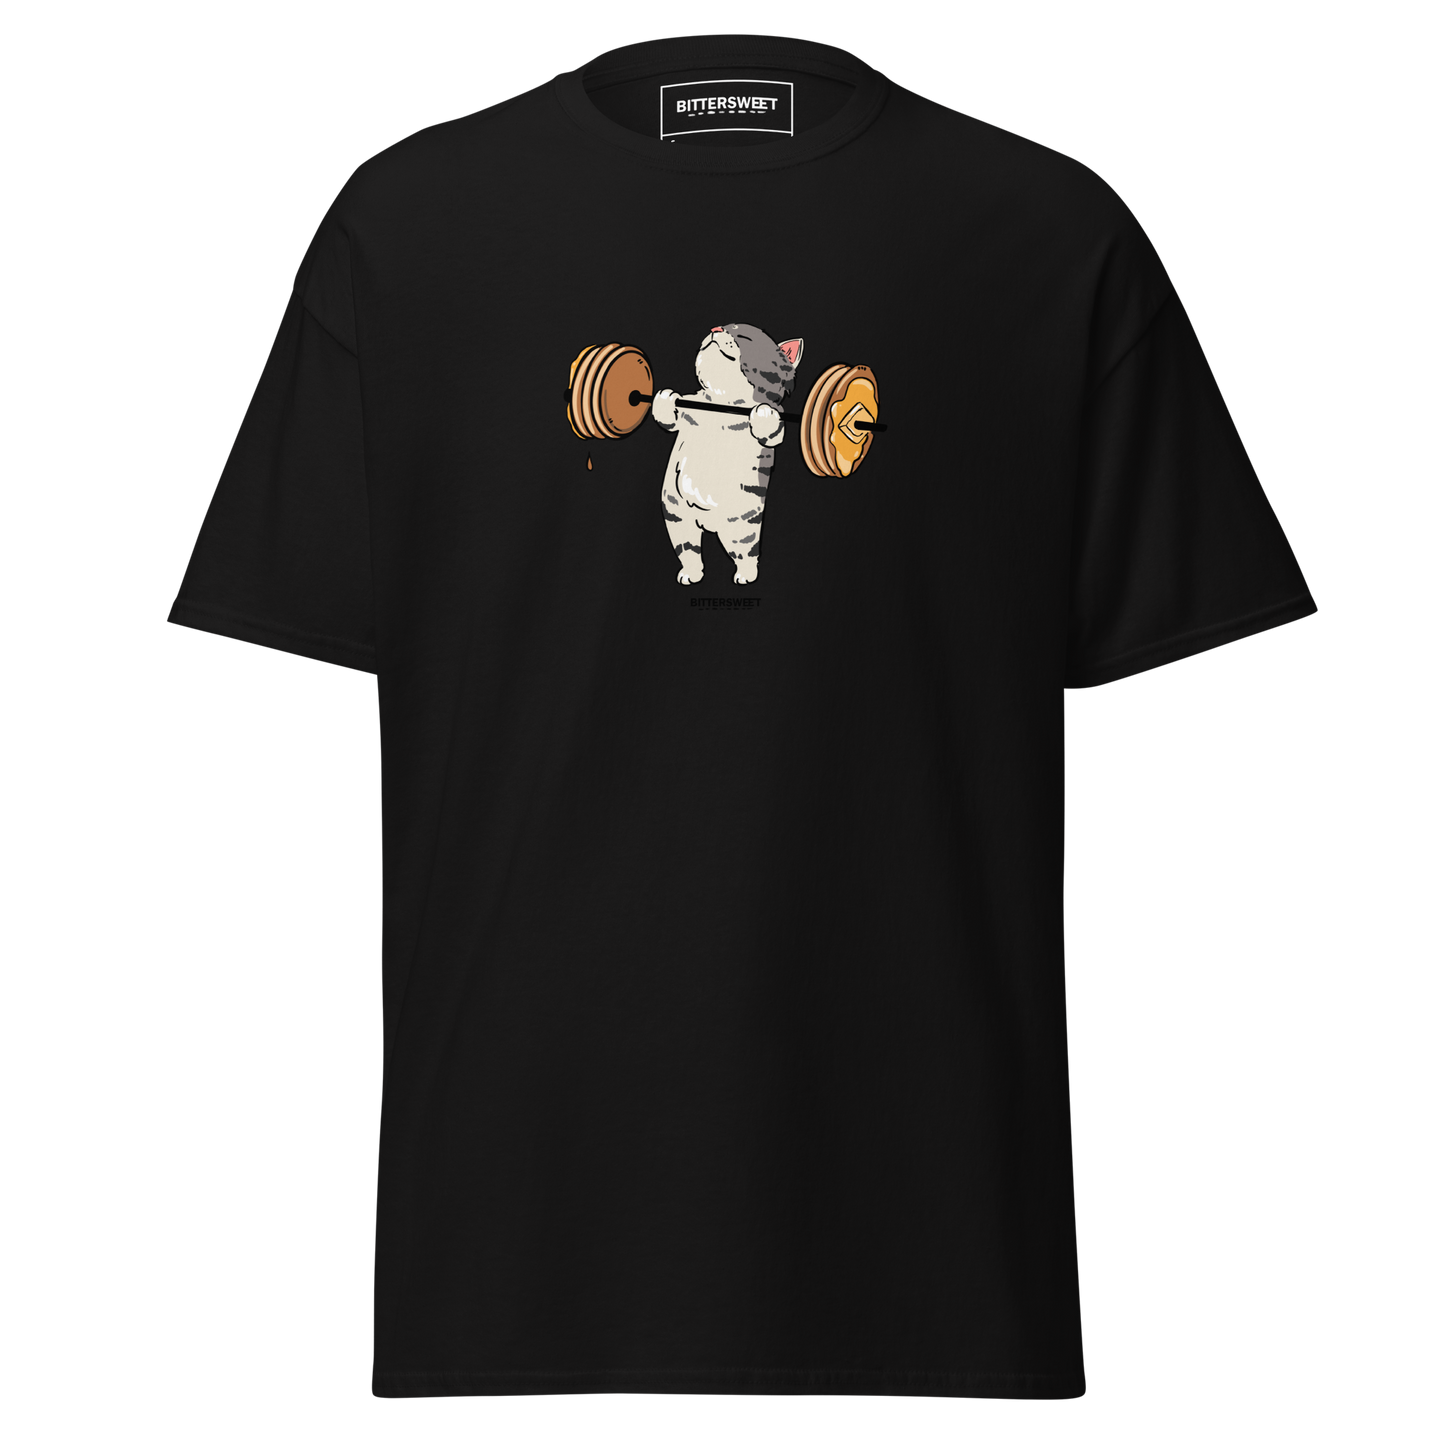 Funny cat graphic heavyweight Gym T-shirt